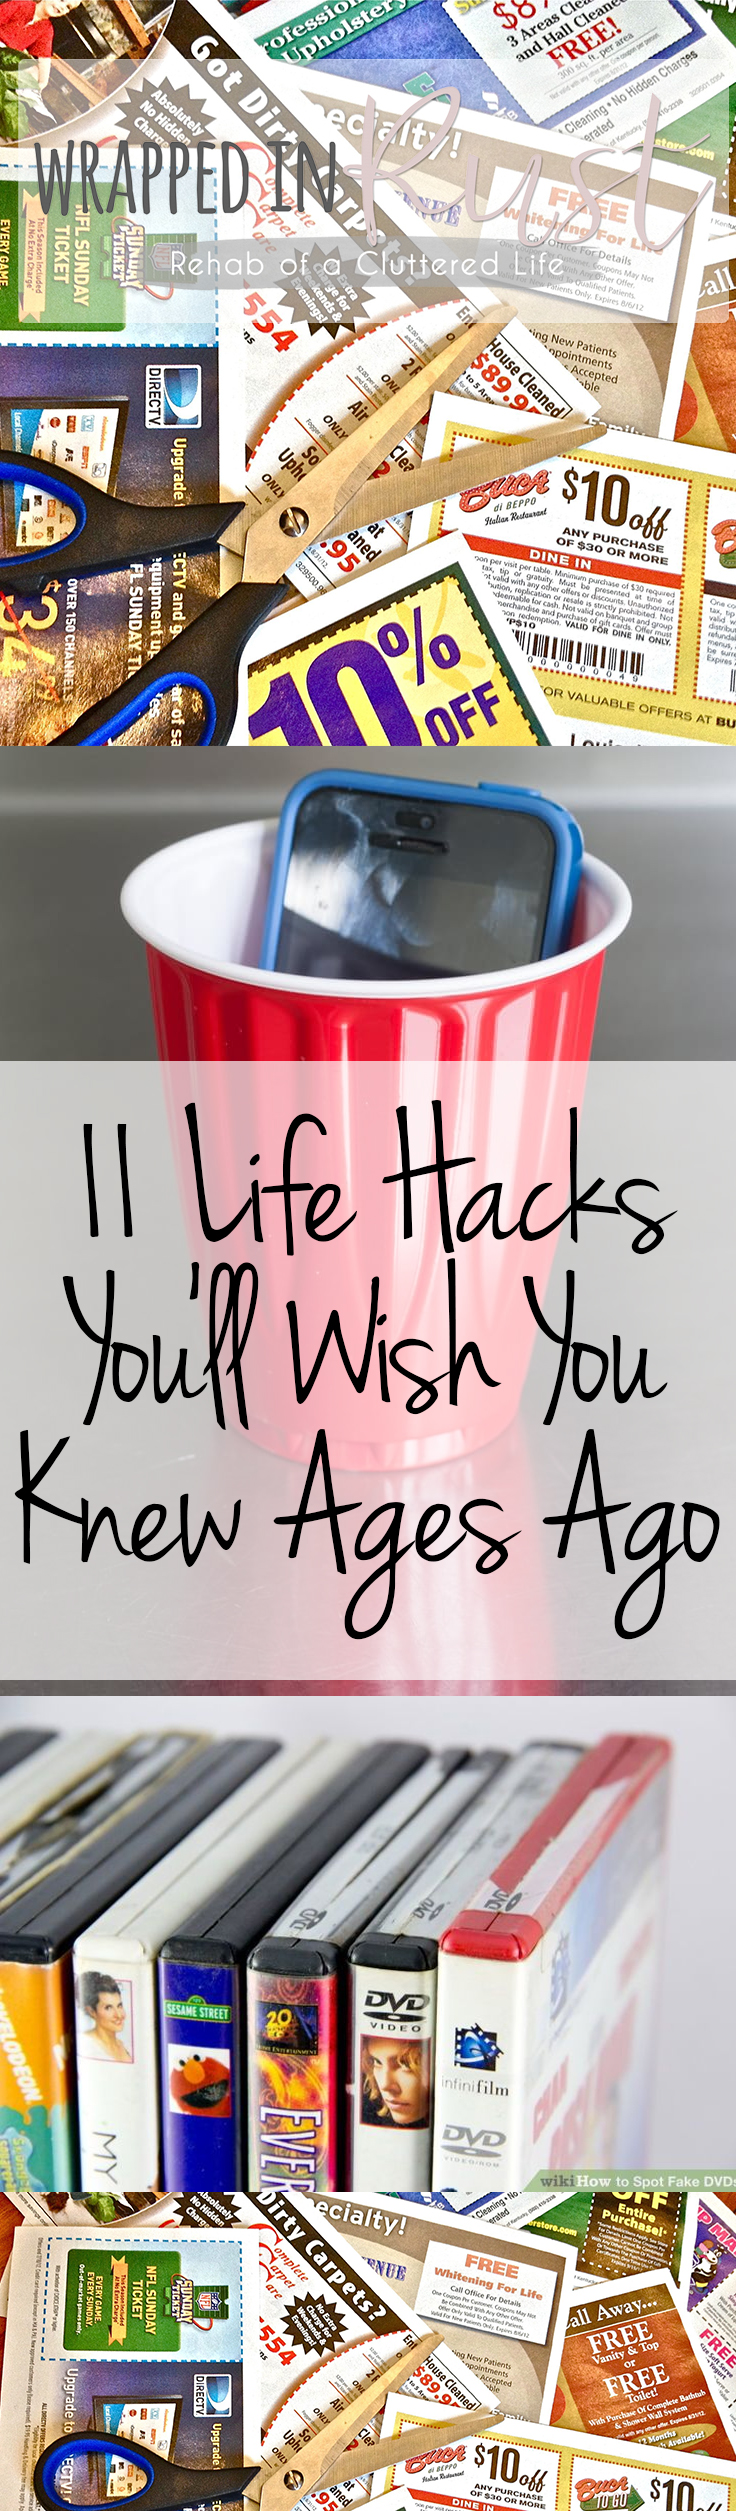 Life Hacks, Tips and Tricks, Life Tips and Tricks, How to Make Life Easier, Cool Ways to Make Your Life Easier, Easy Ways to Simplify Life, Popular Pin. 